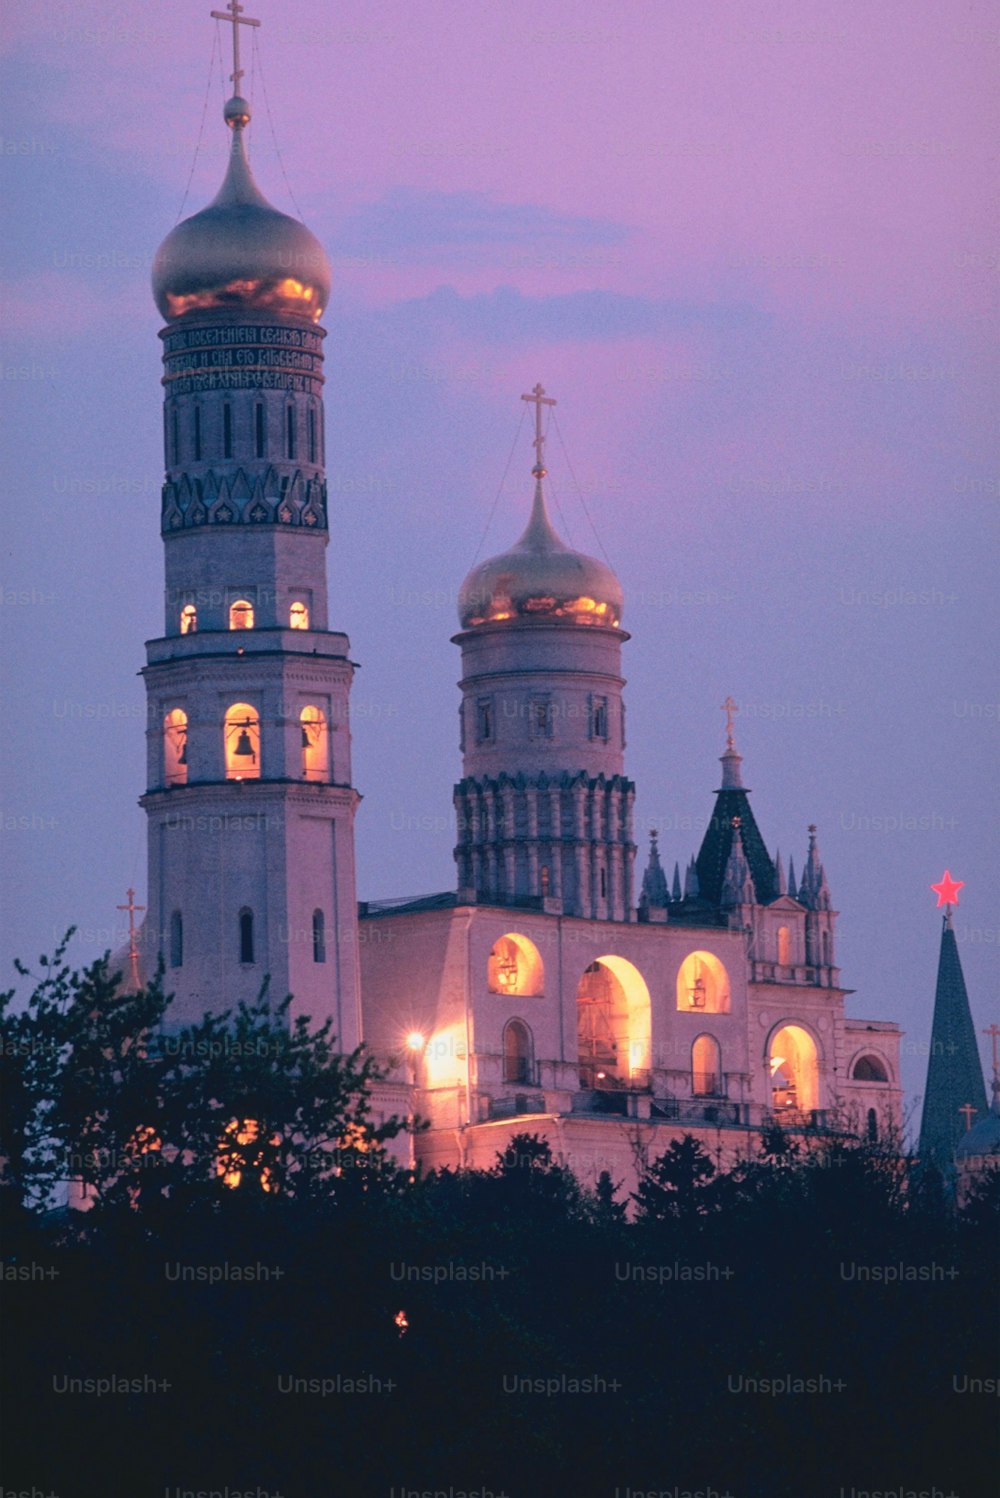 a large white building with two towers at night